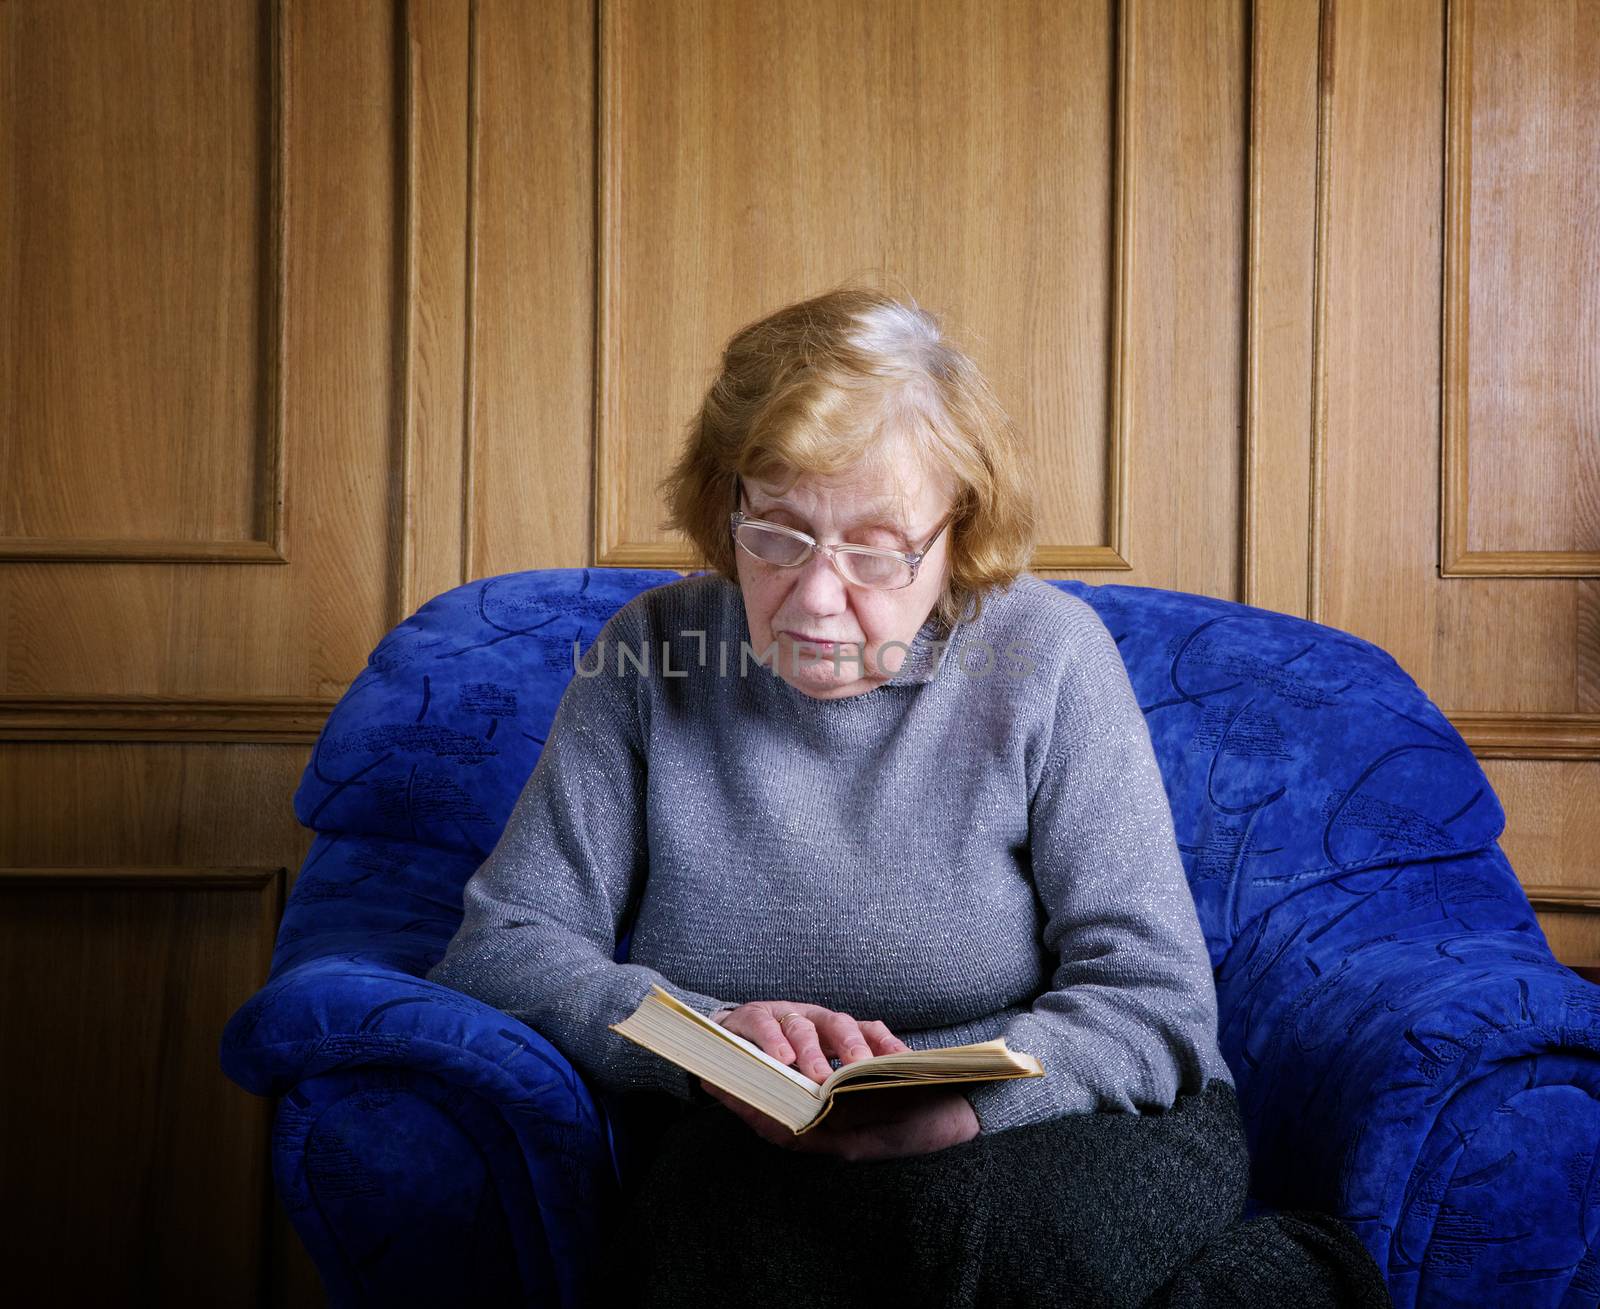 The old woman sits in an armchair and reads the book